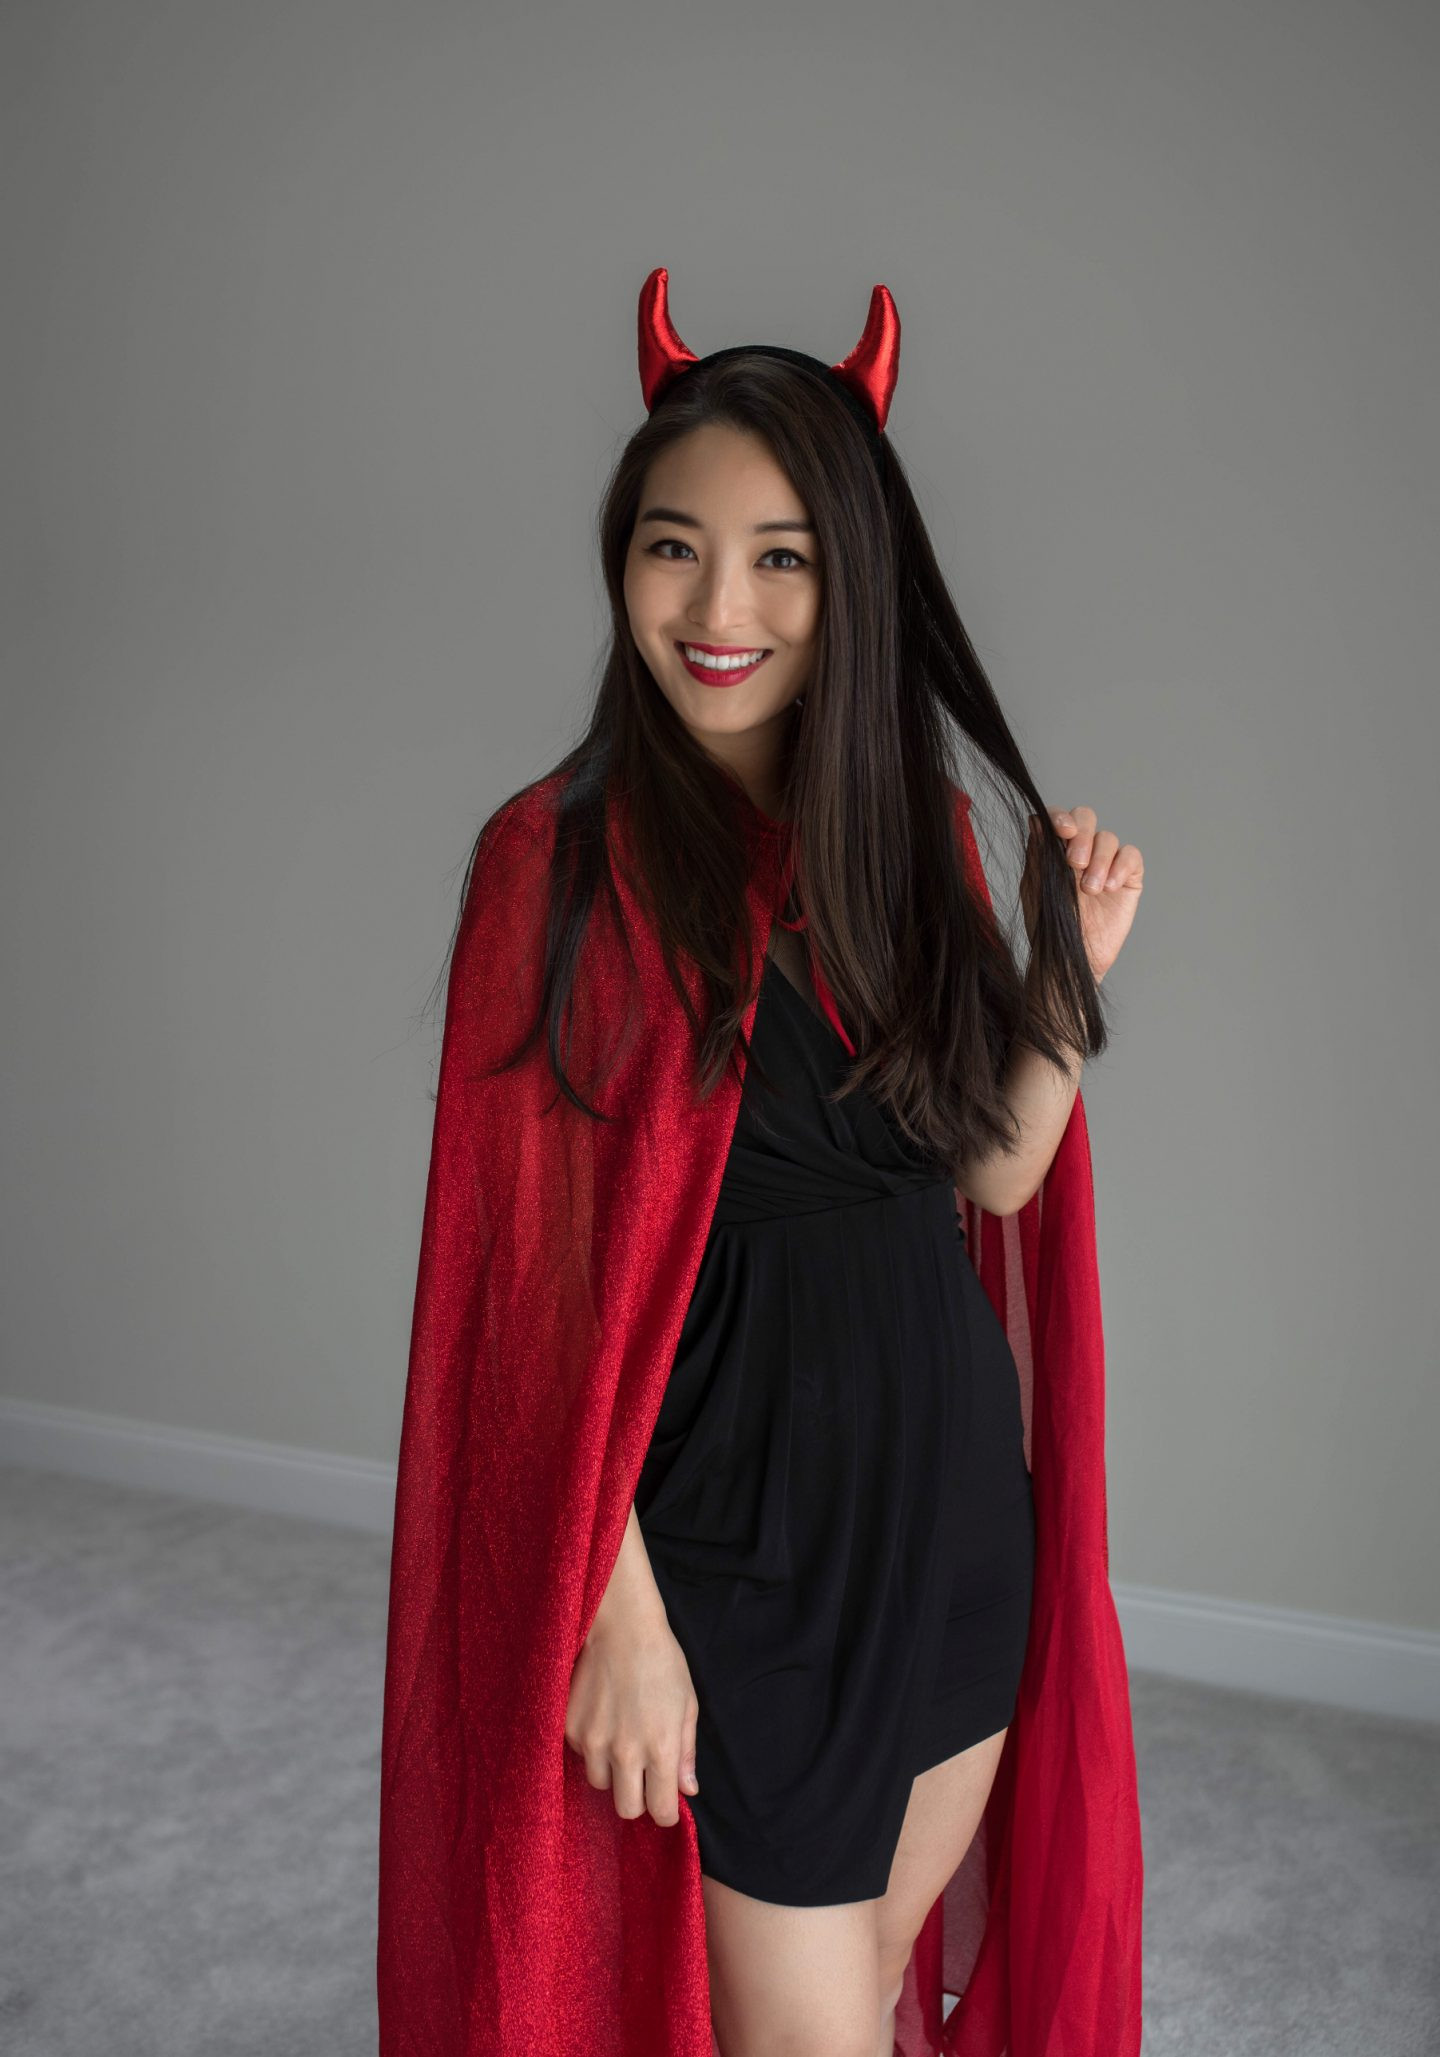 Devil Halloween Costumes Ideas
 Affordable Halloween Costume Ideas $150 Giveaway to